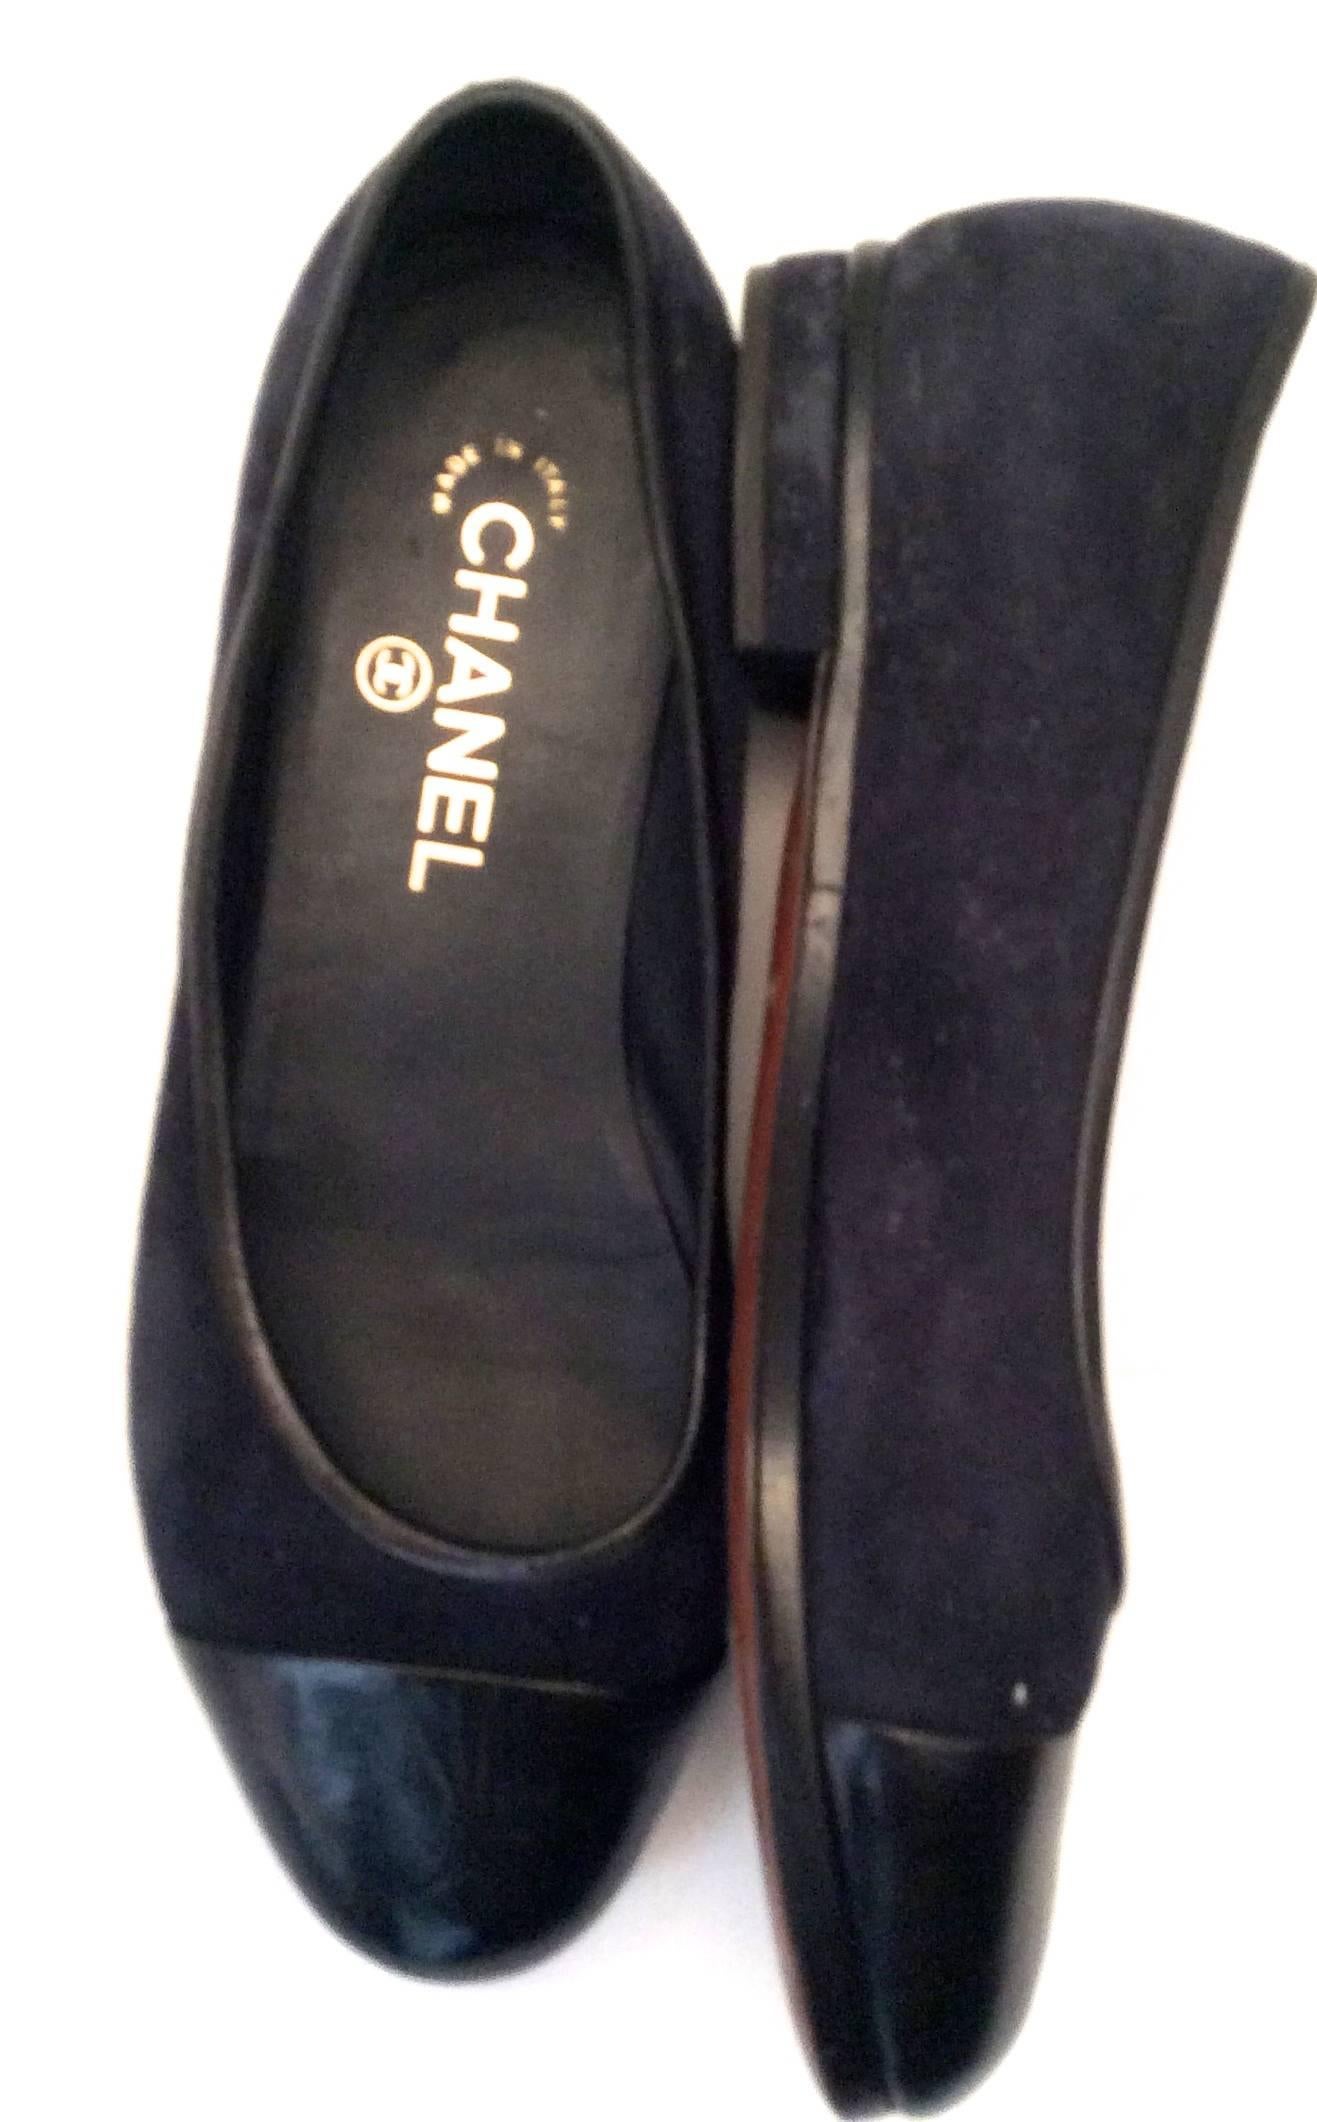 You are looking at a beautiful pair of Chanel ballerina flats. They are wonderful because they are more structured sole as you can see on the photographs. They are navy, suede with blue leather tips and black leather surrounding the opening of the